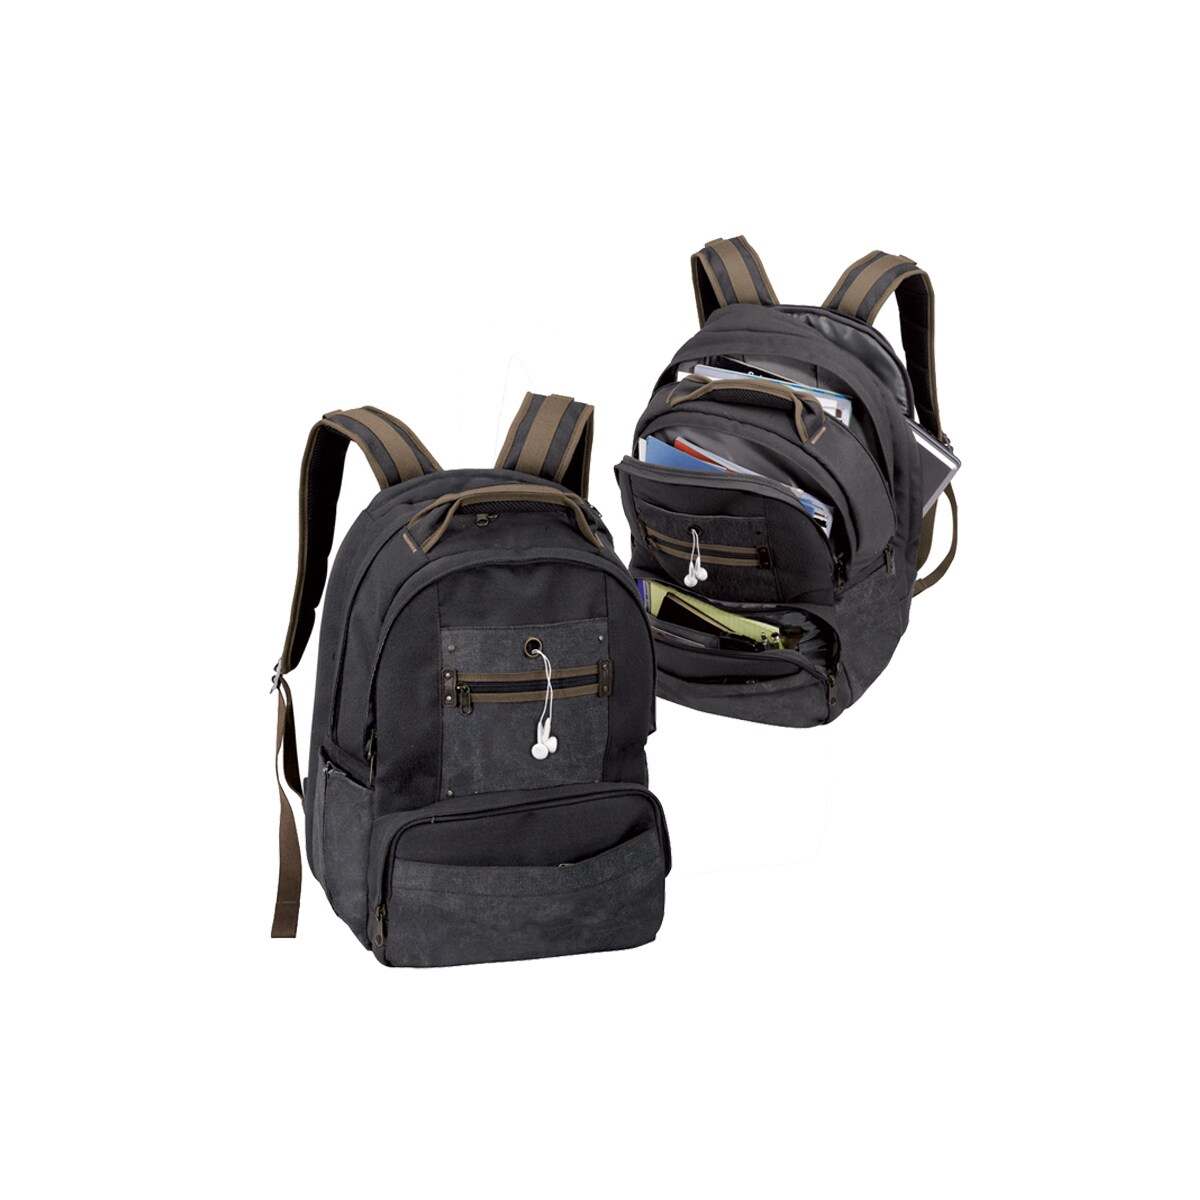 Impact Computer Backpack - image 1 of 4